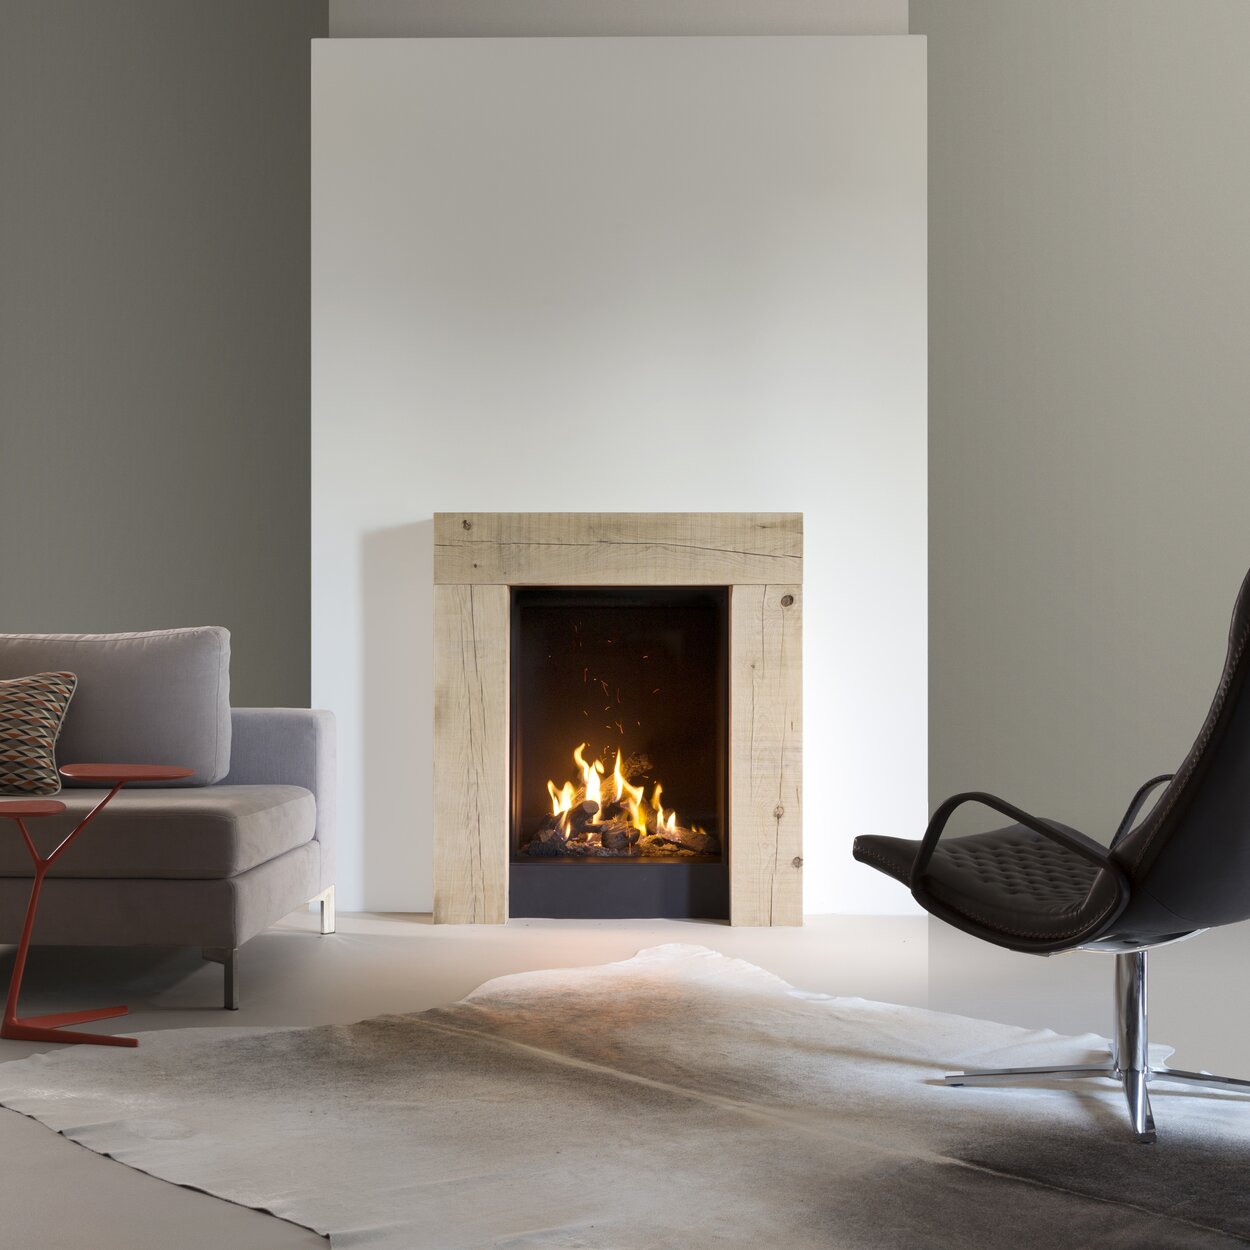 Gas fireplace GP60/79F front version with wooden frame built into white wall